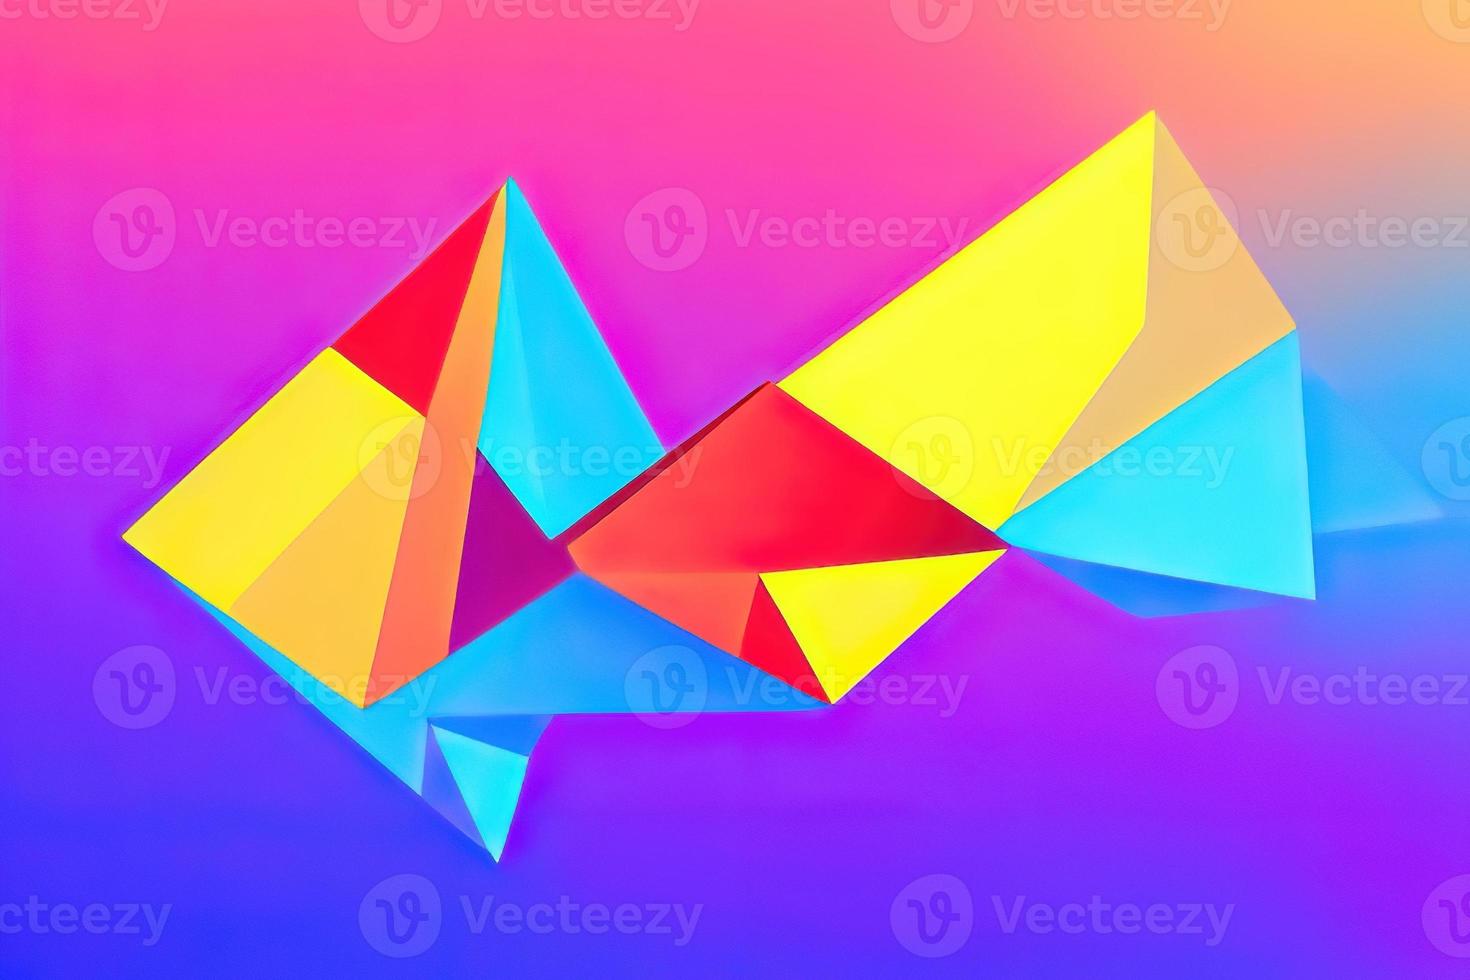 Triangular Backgrounds with an Abstract Graphic Element photo